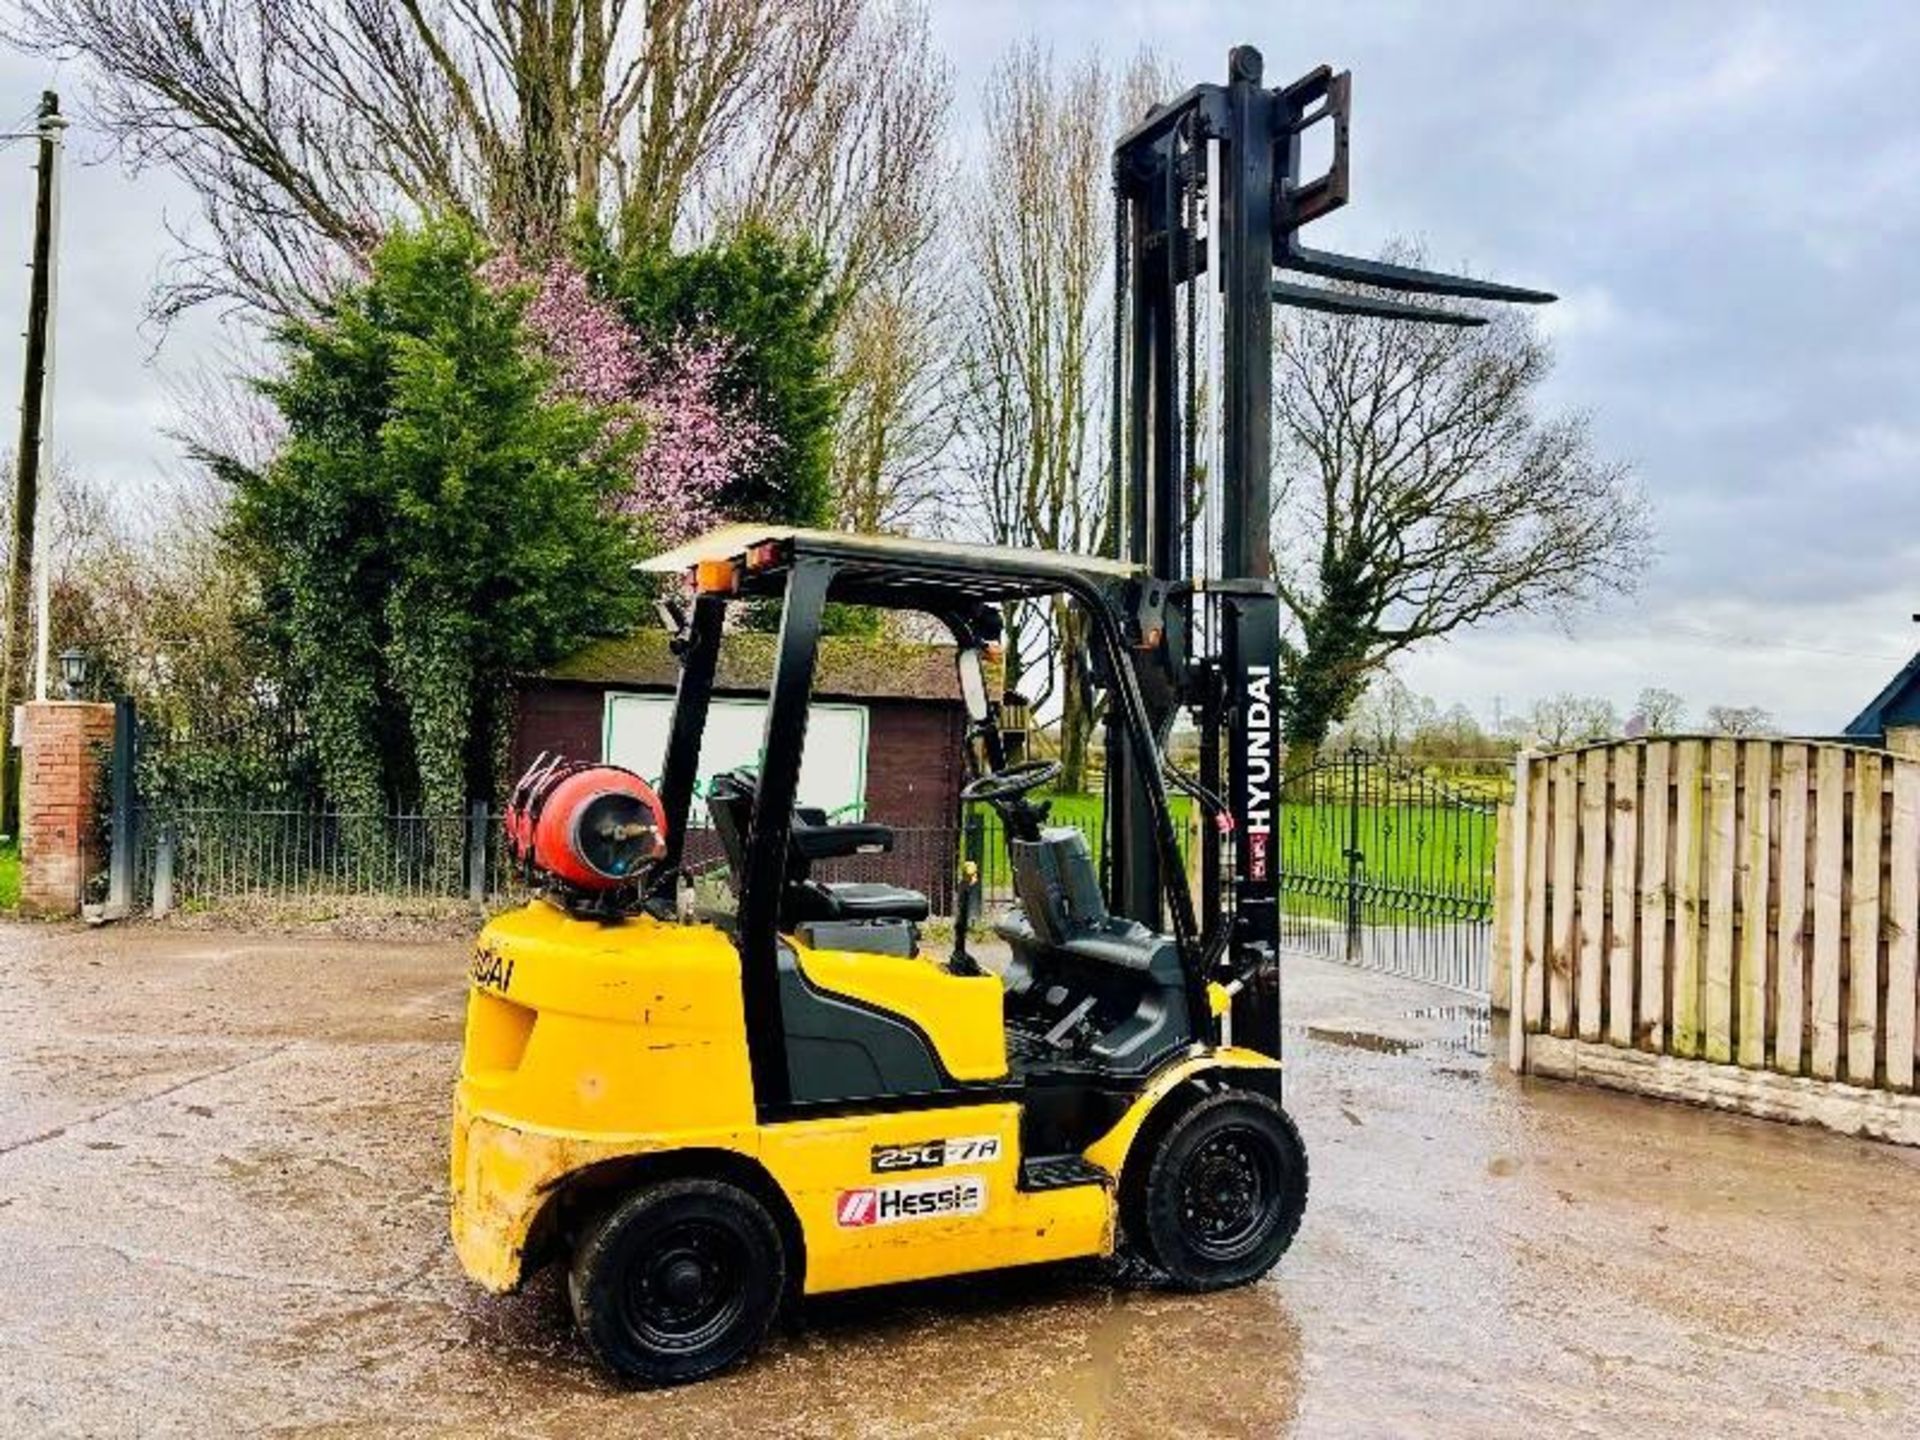 HYUNDAI 25L-7A FORKLIFT *YEAR 2016* C/W PALLET TINES - Image 5 of 15